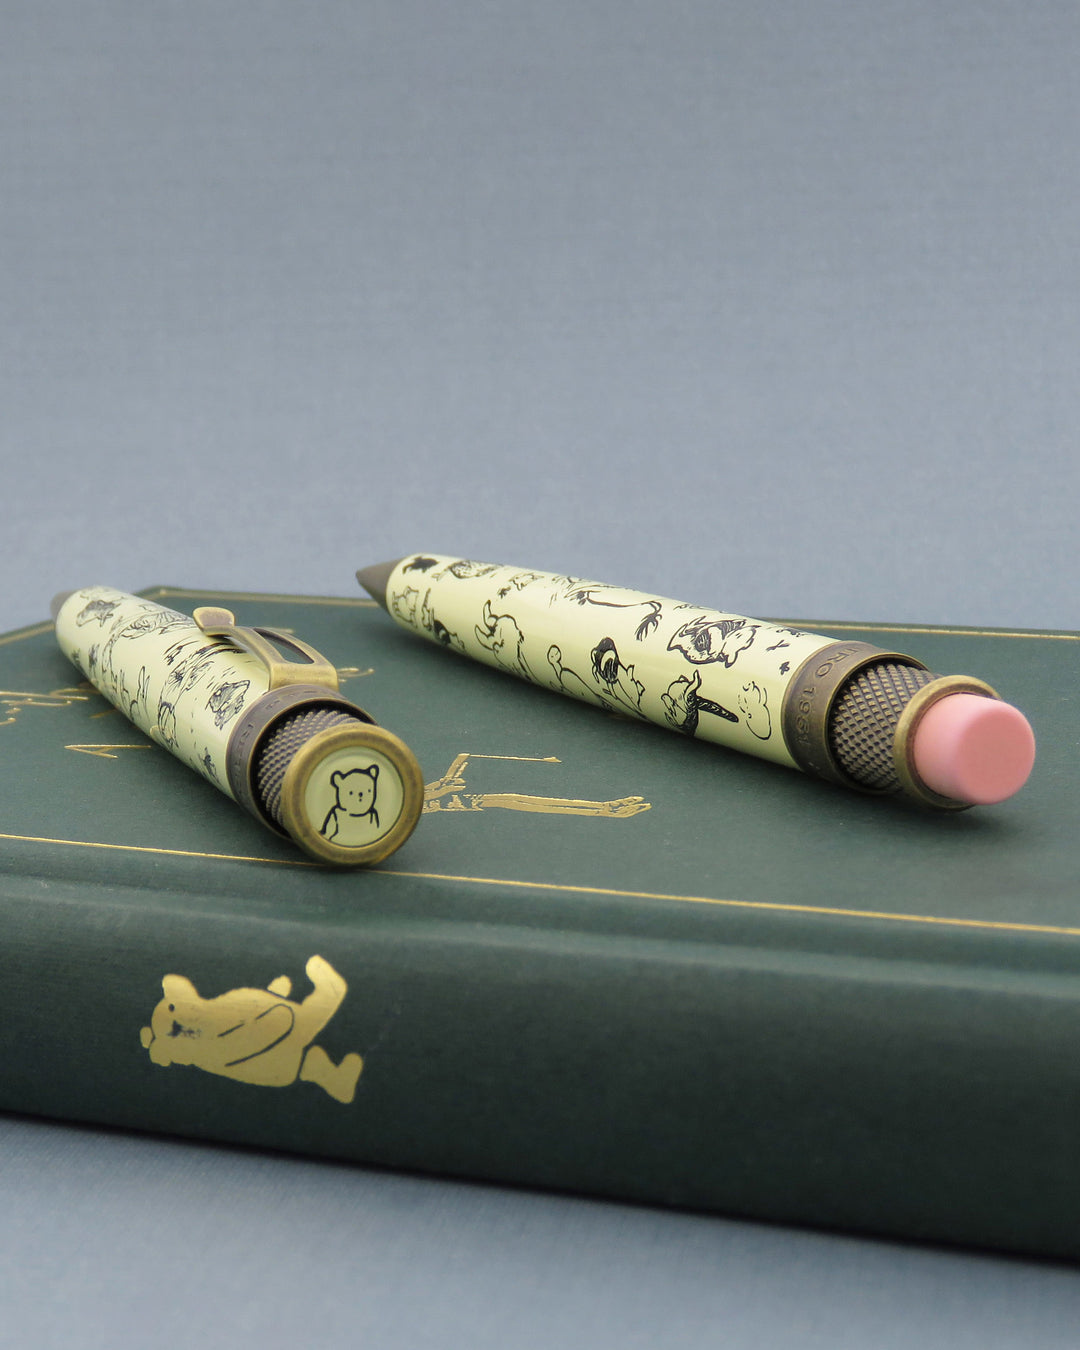 Winnie-the-Pooh decorations pen and pencil laying on top of book